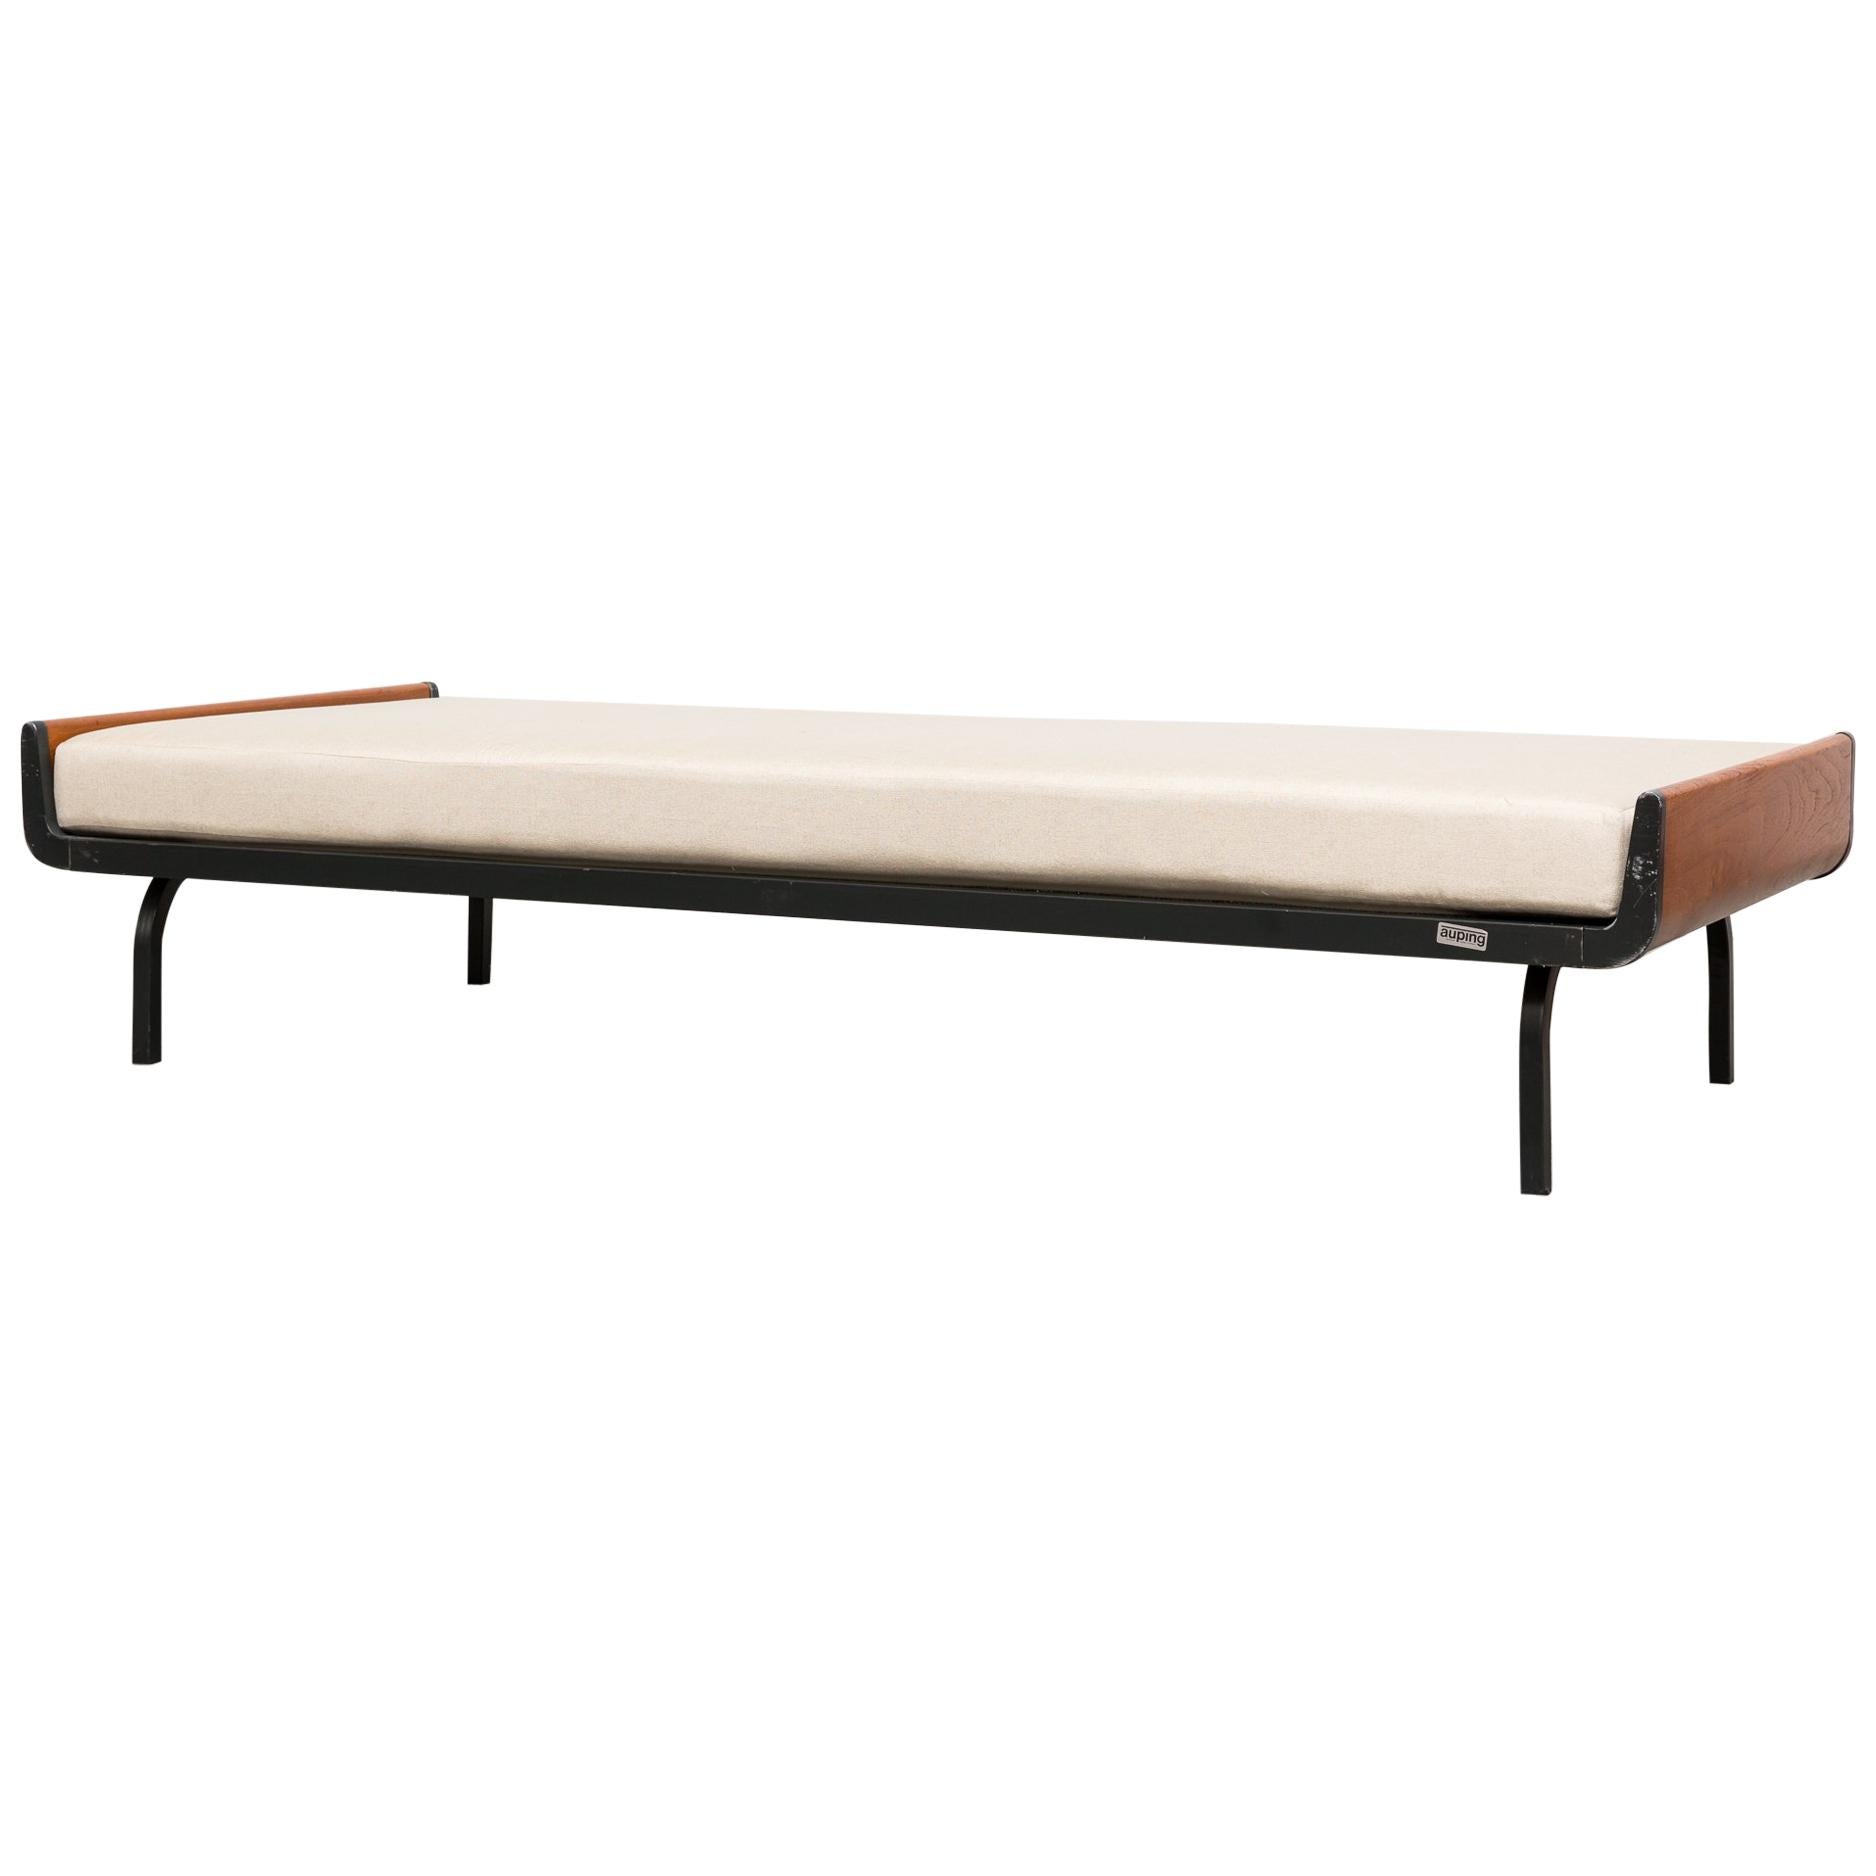 Midcentury Teak and Metal Auping Daybed